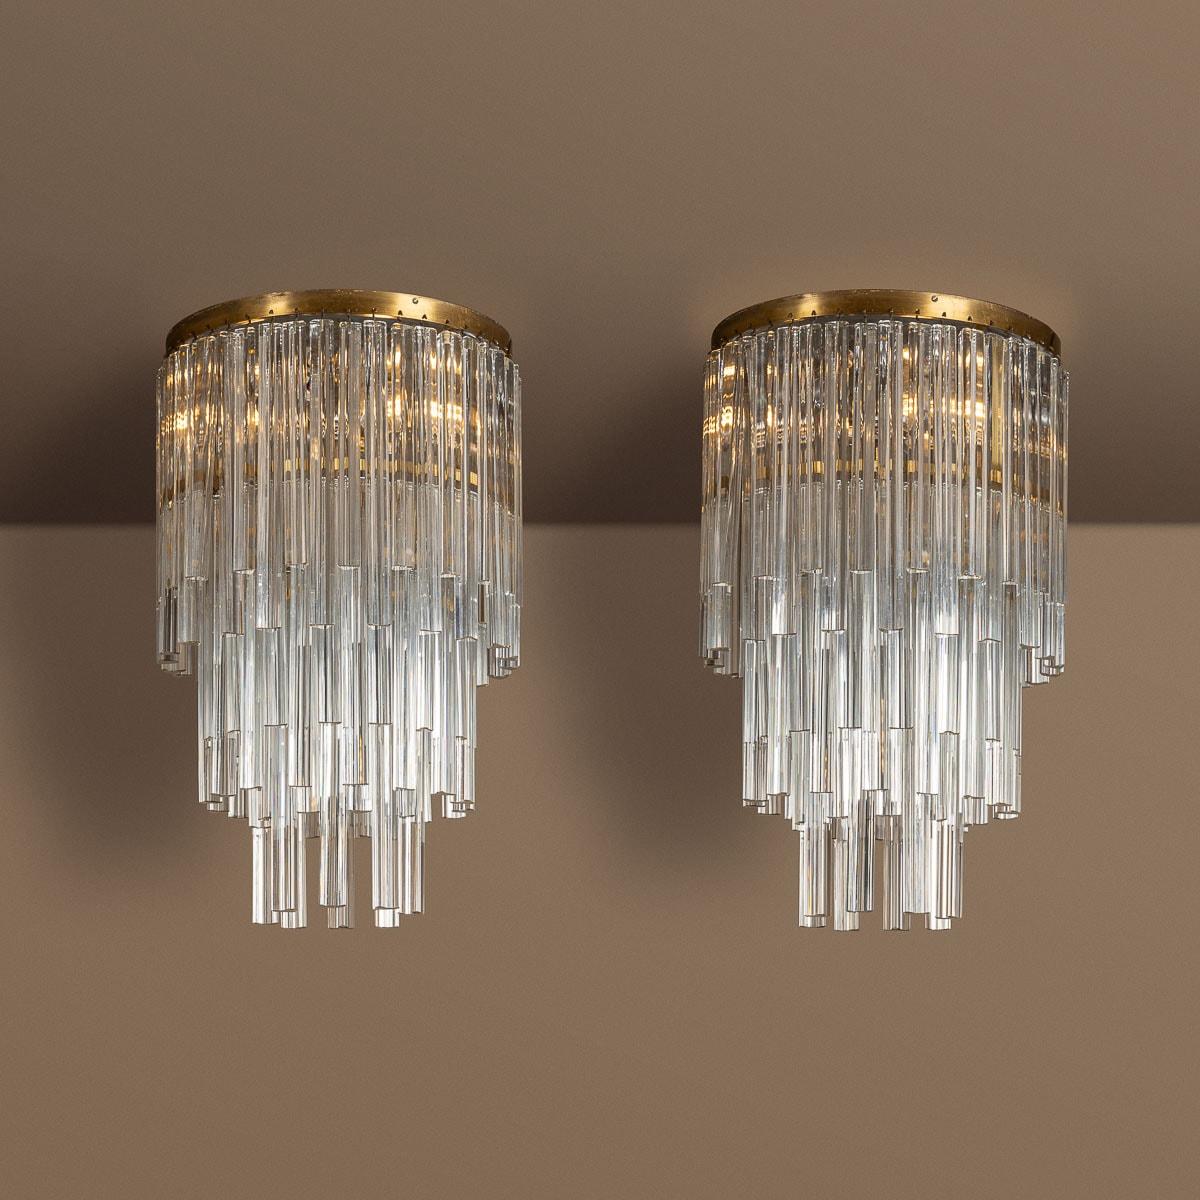 Crafted in Murano, Italy by Venini during the 20th century, this pair of chandeliers embodies a unique and exquisite style. The chandelier's structure is meticulously fashioned from high-quality Murano glass. Its pendant design boasts long, graceful